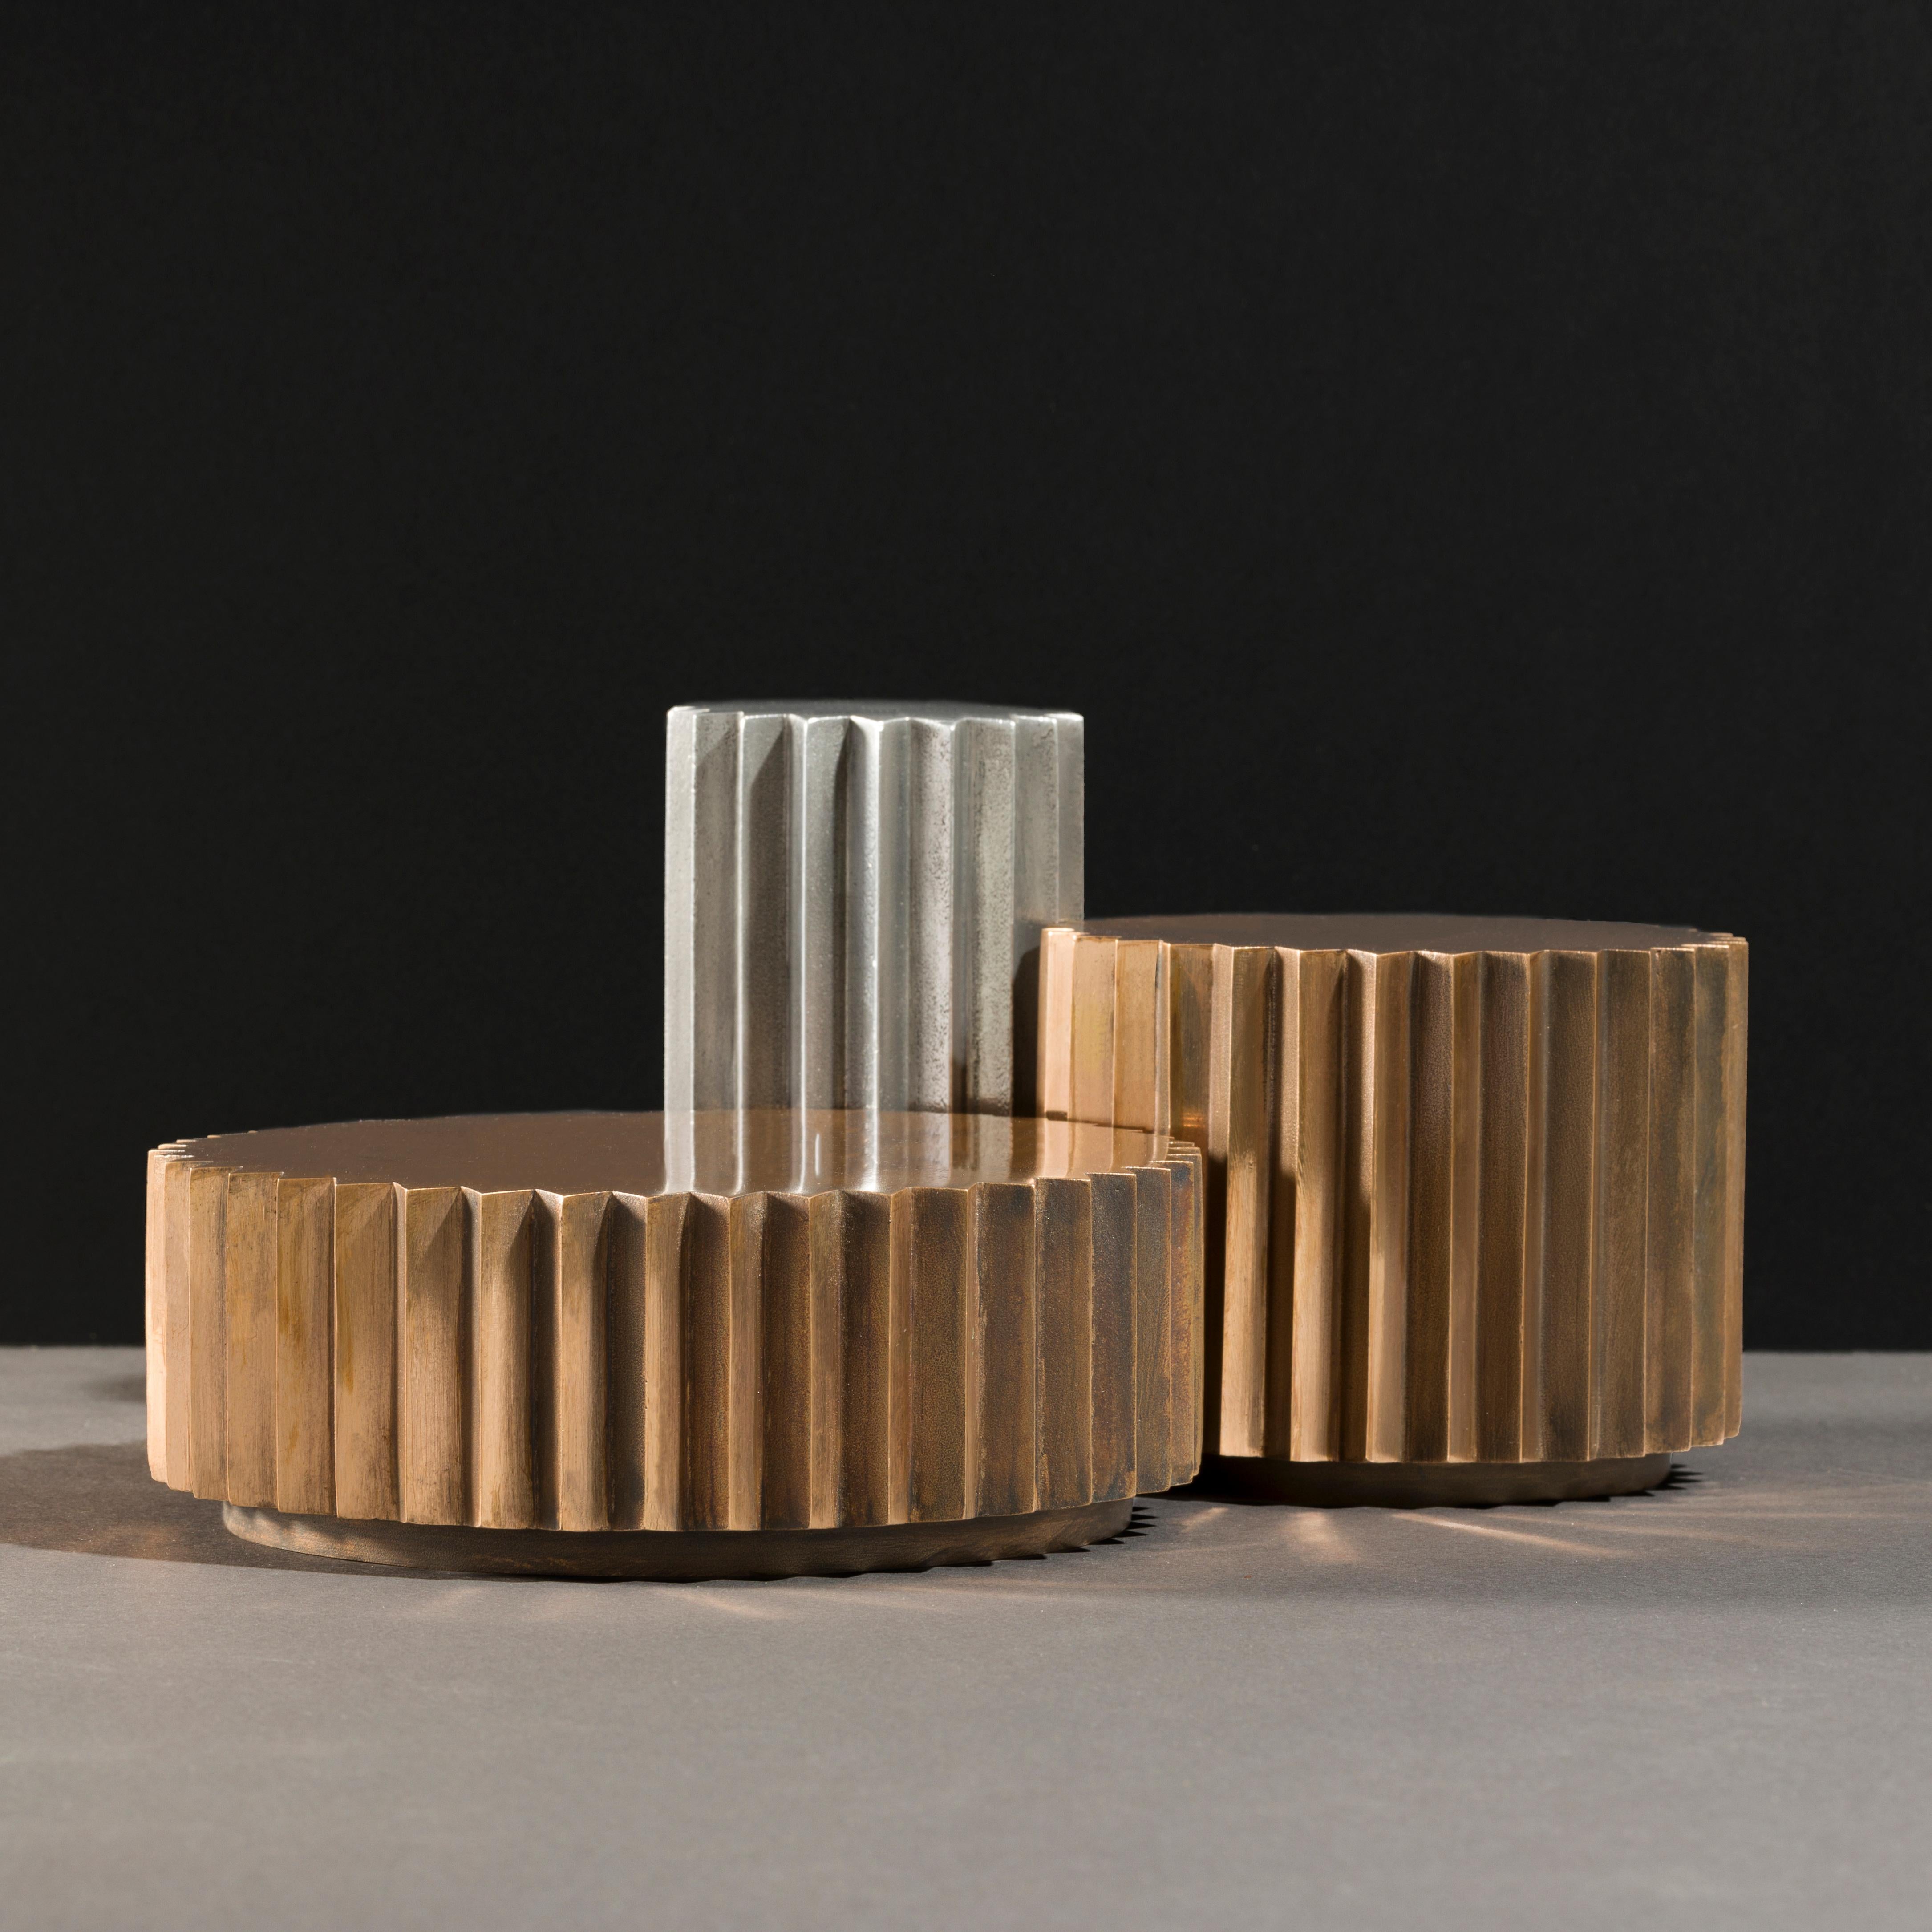 Side tables in cast bronze and aluminum of different diameters and heights that can be combined to create a coffee table. Inspired by Doric columns in archaic architecture, the extruded multi-point stars have a different finish on each vertical